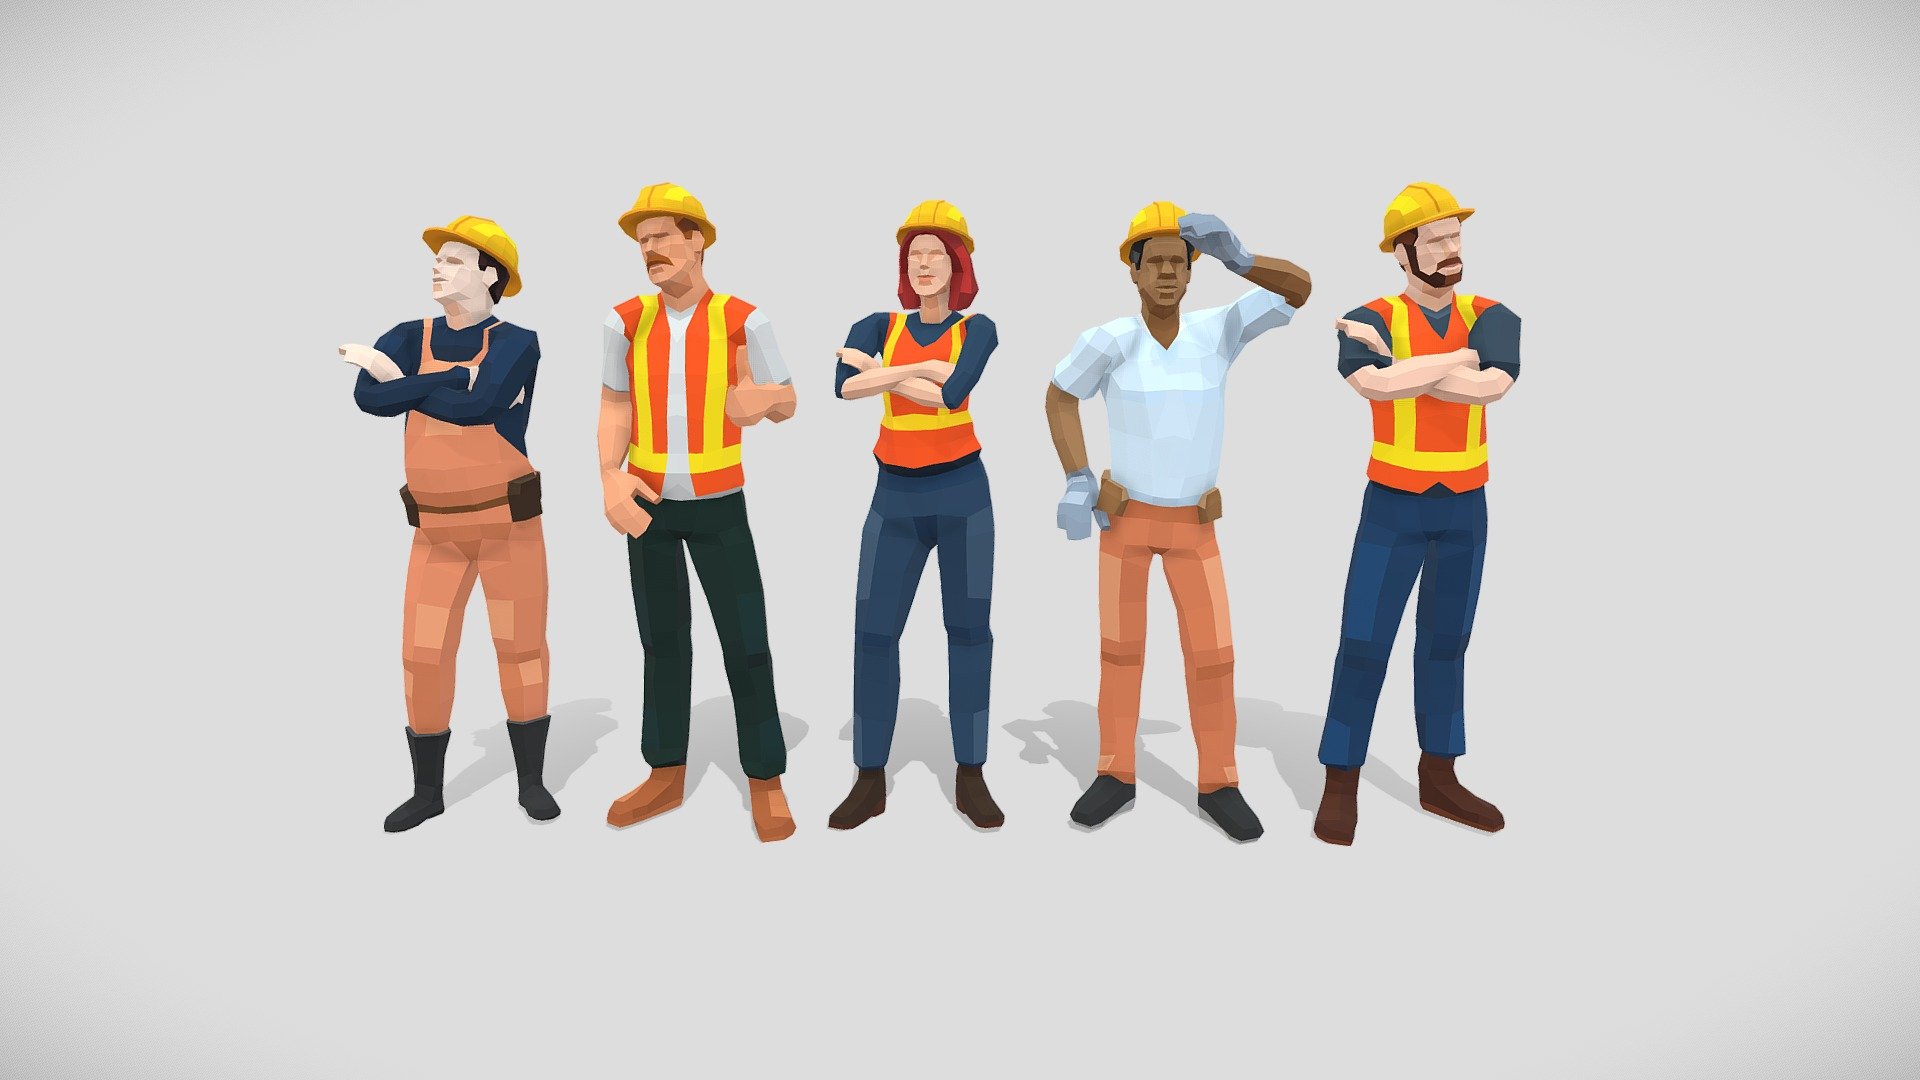 A team of 5 Low Poly Style characters representing workers from construction sites or similar. Created with 3ds Max 2016, with exports to FBX and tested with Unity for compatibility with Humanoid System. All rigged with Biped + Skin. Get the rigs from additional .zip file.

Optimized for mobile with about 950 polygons (or 1800 triangles), UV mapped using a color texture palette, easy modifiable on 3ds Max using pX Poly Paint script.

You can also find these character as part of  100-Mega-Pack or Professional People 3d model